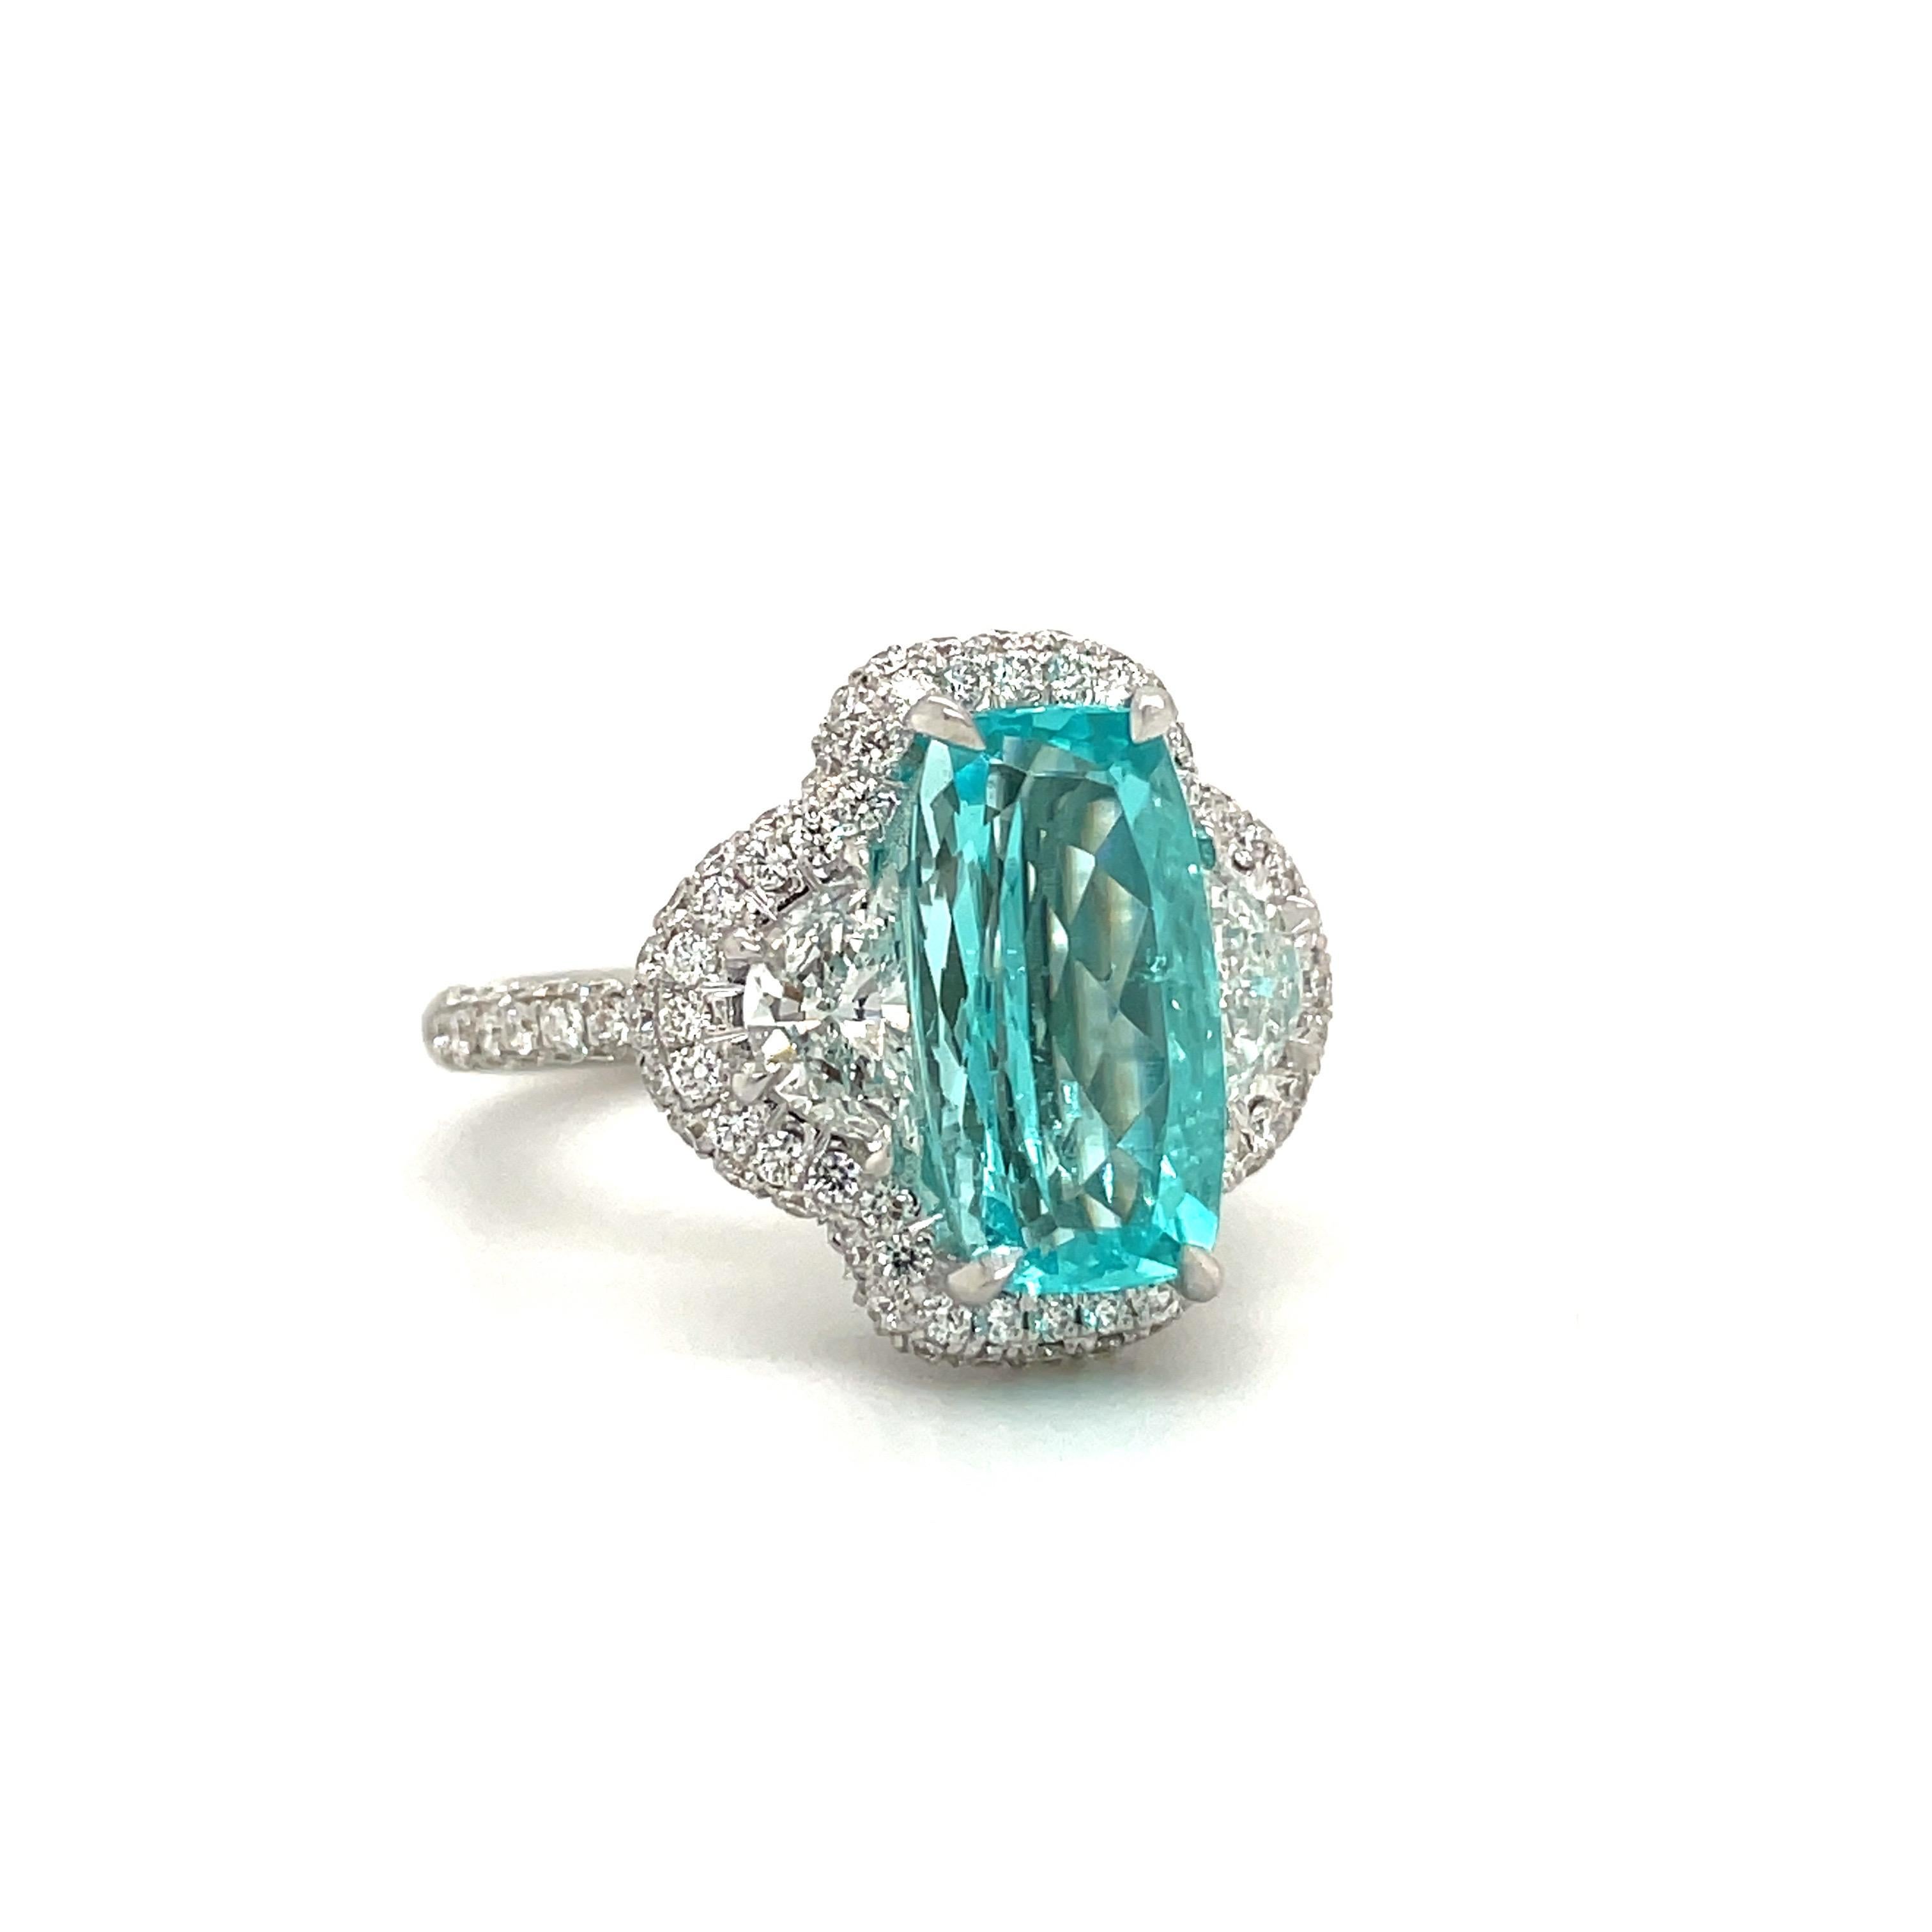 Magnificent 18 karat white gold ring exquisitely set with a 3.94 carat rectangular Paraiba Tourmaline. The center stone is flanked with 0.83 carats half moon diamonds . The center stones are surrounded by a beautiful pave diamond setting, which